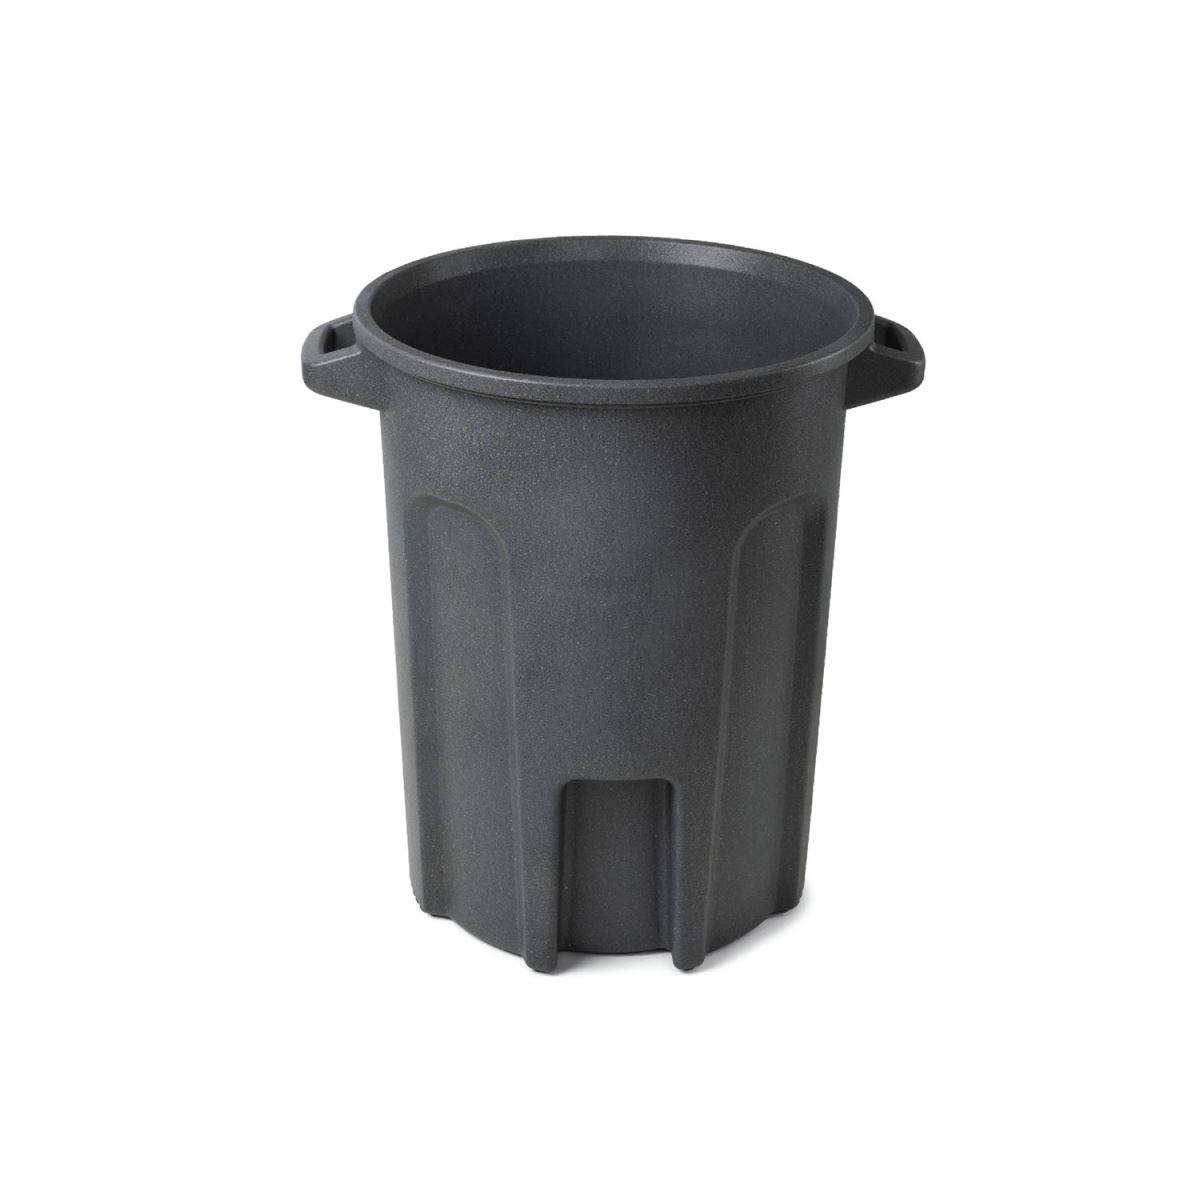 55 Gallon Round Container Trash Can Without Lid 31.3 IN. X 31.4 IN. X 26.3 IN.